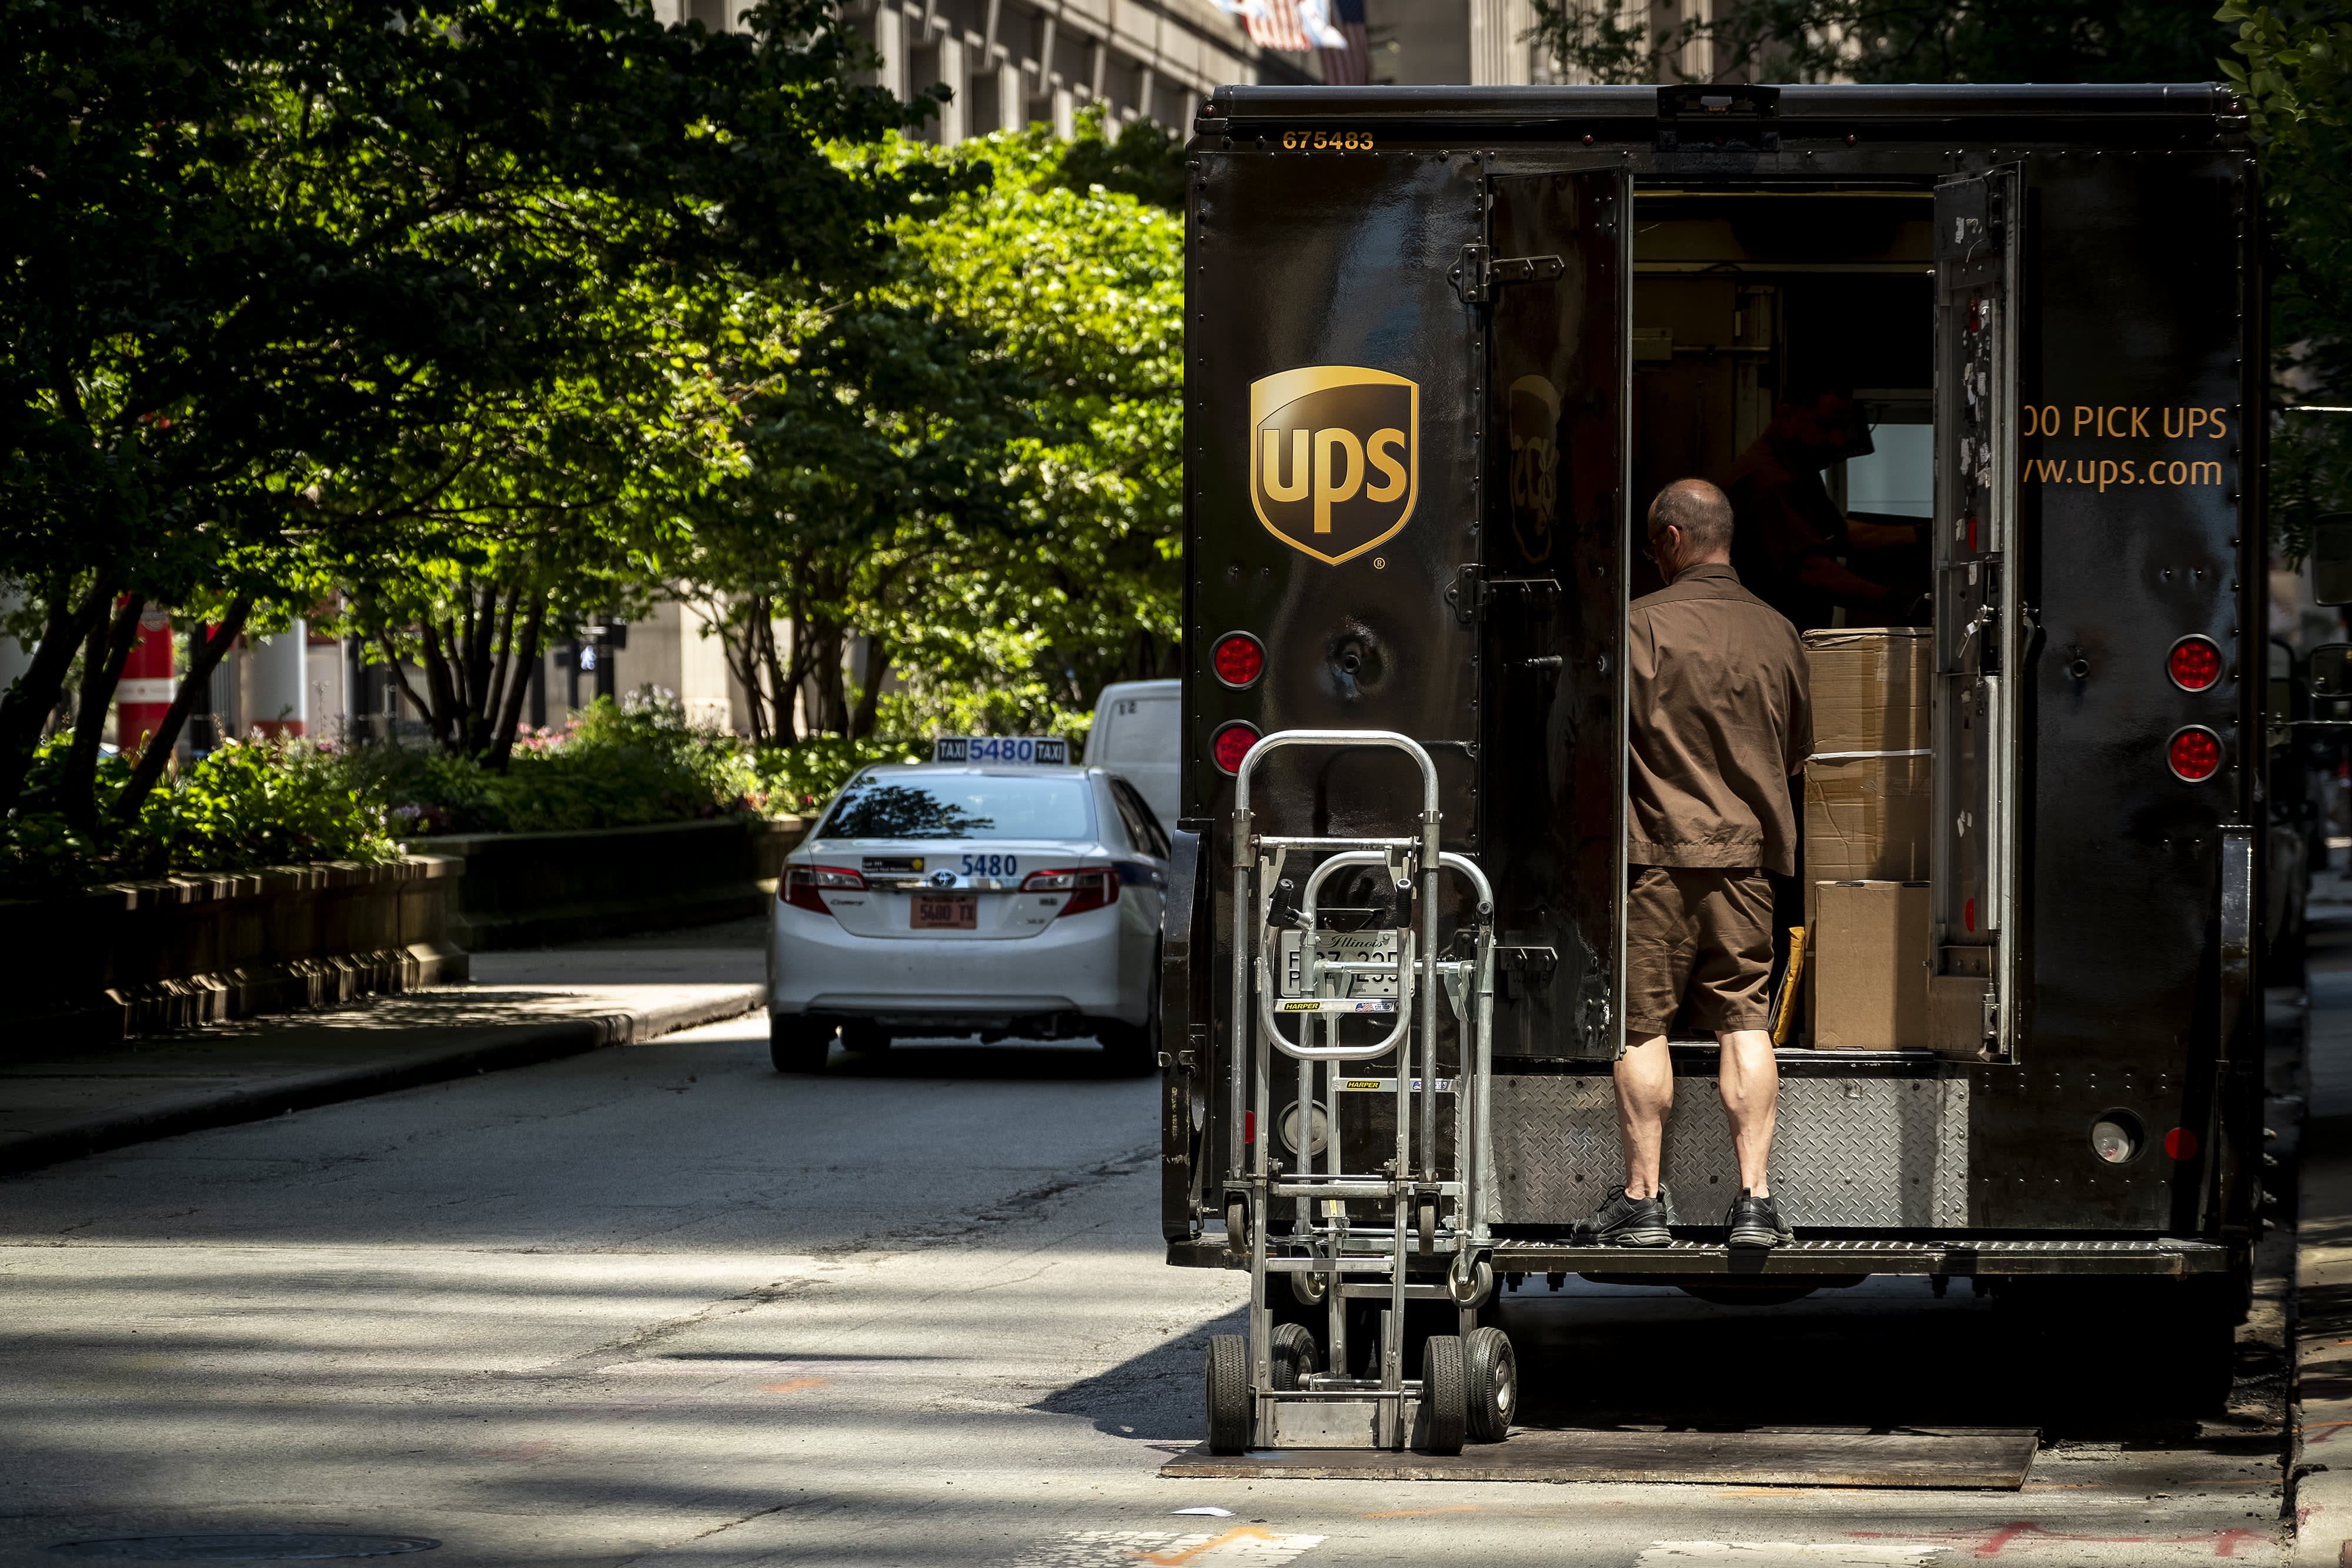 HOW MUCH MONEY CAN YOU MAKE OWNING A UPS STORE